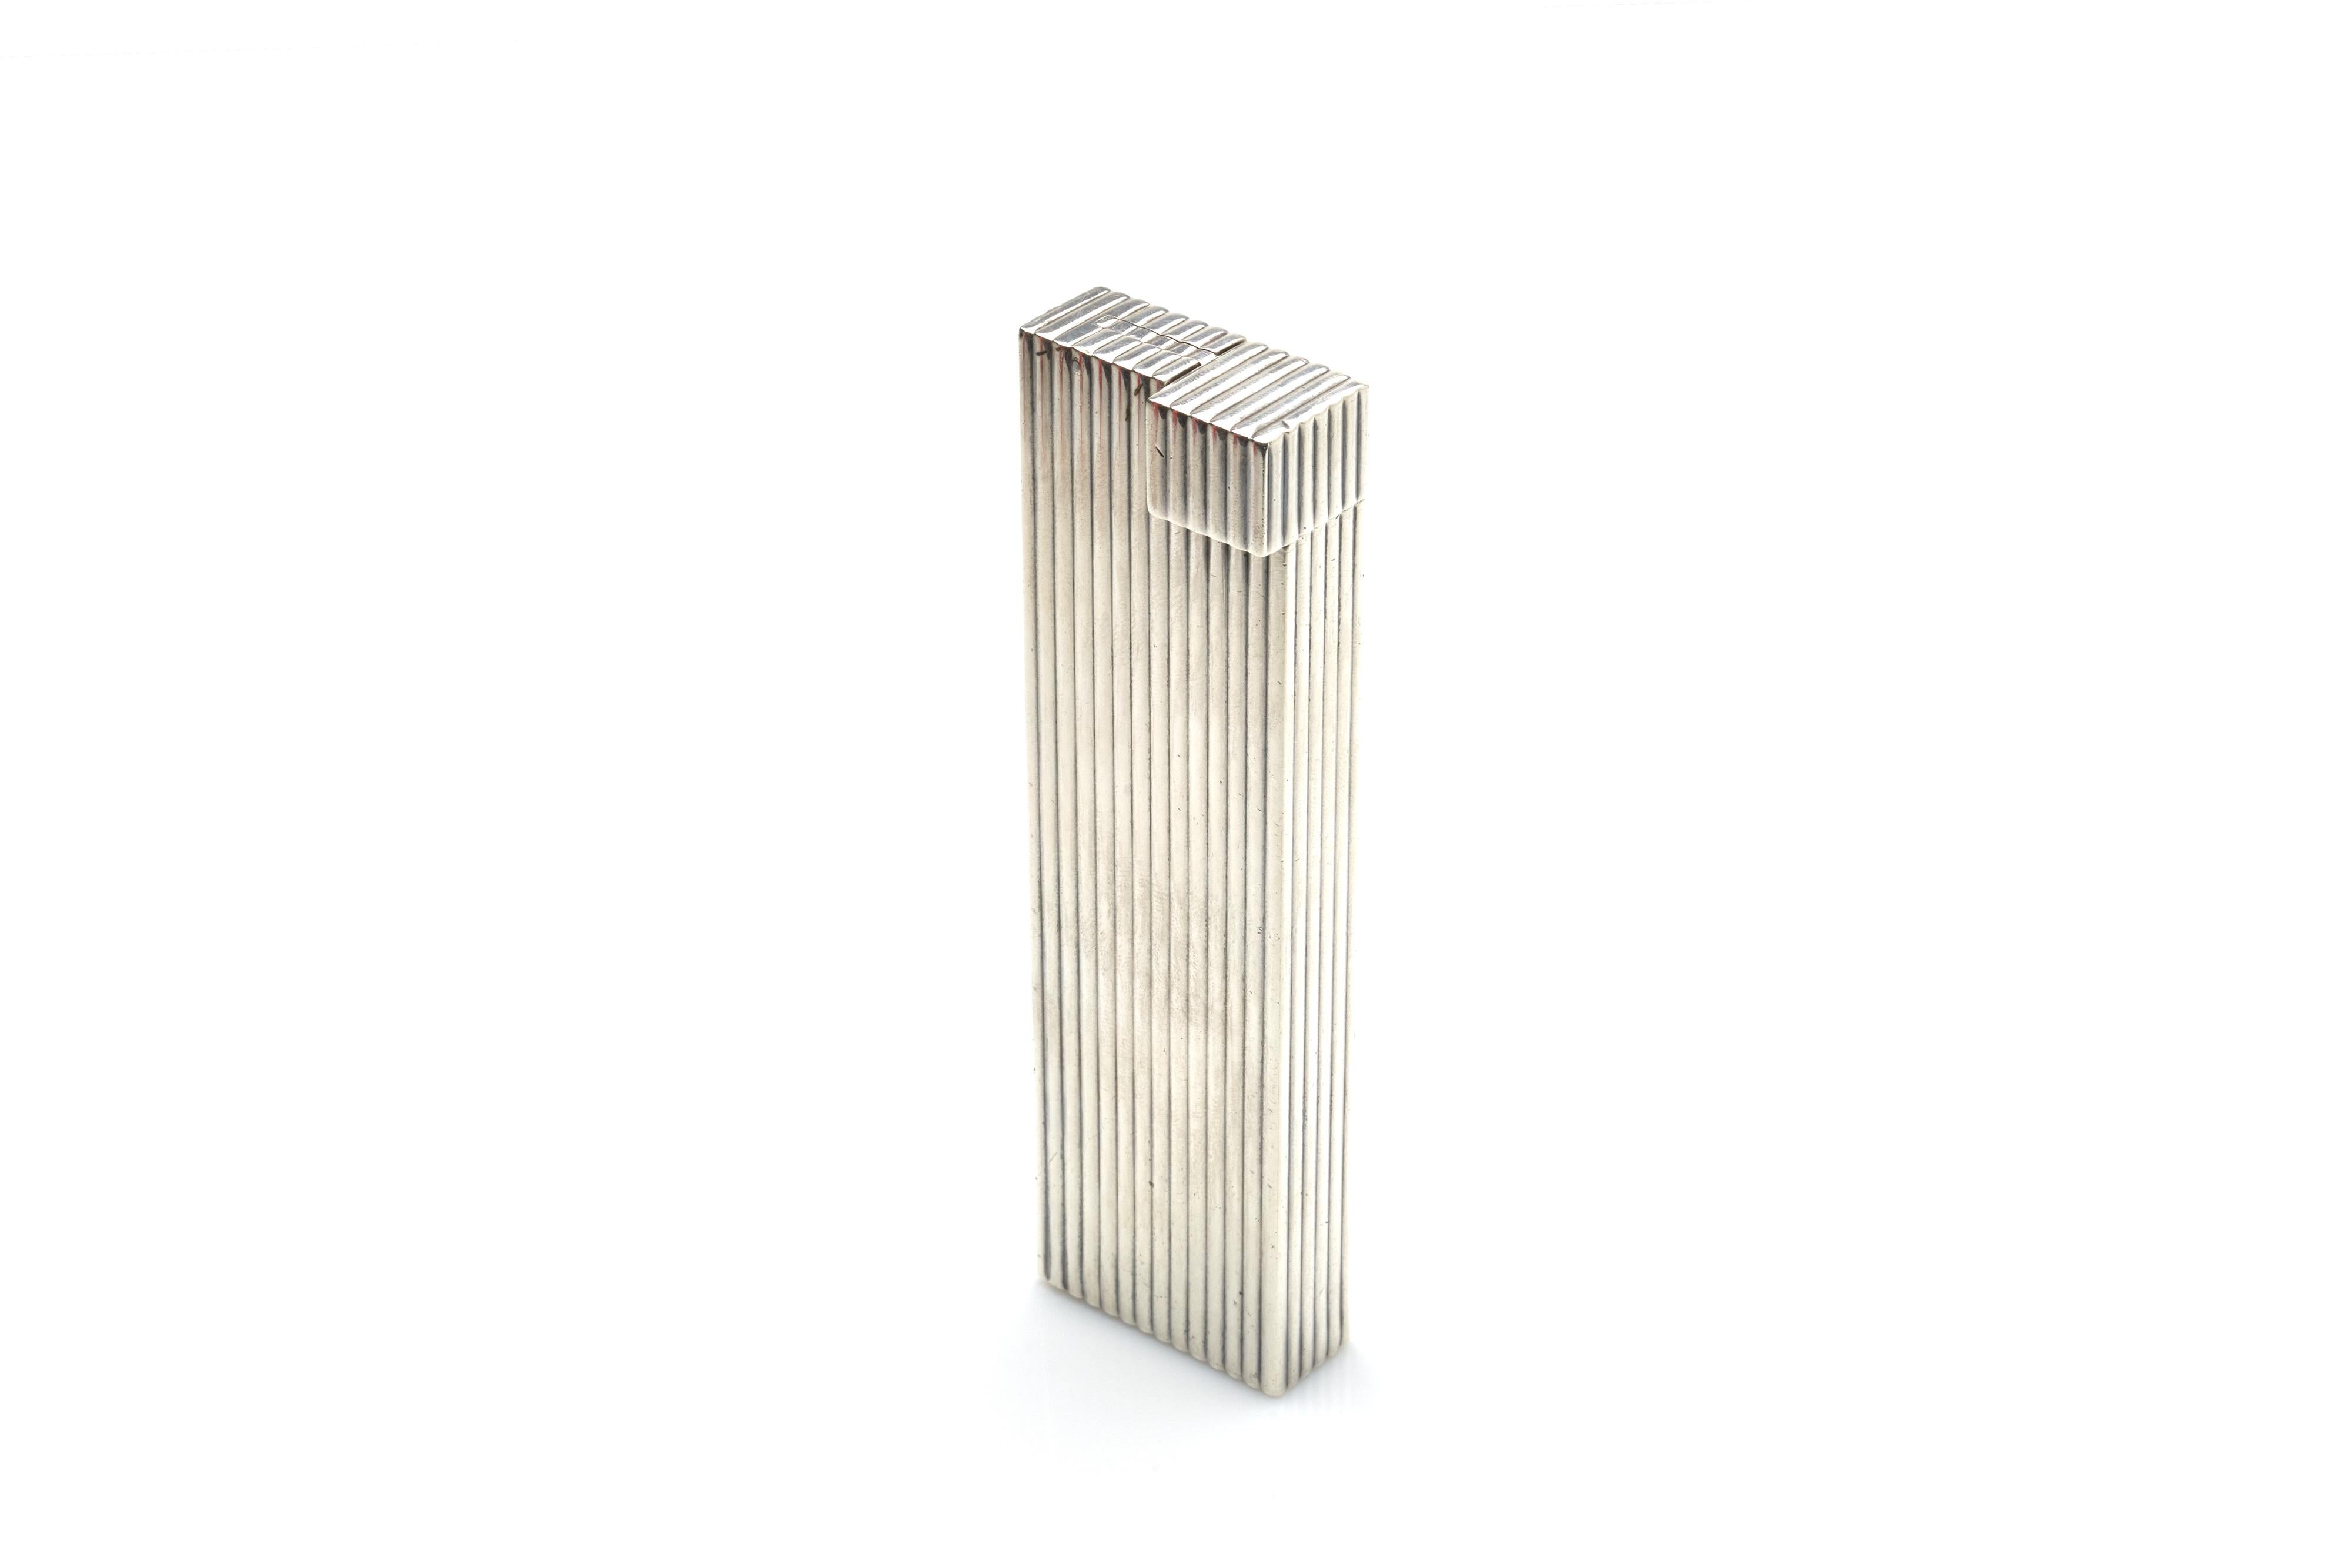 A large table lighter by Cartier, crafted out of sterling silver in a fluted pattern. This is one of the best examples of Cartier's history of supreme craftsmanship and luxury. Marked on bottom.

1930s.

Measures: 5